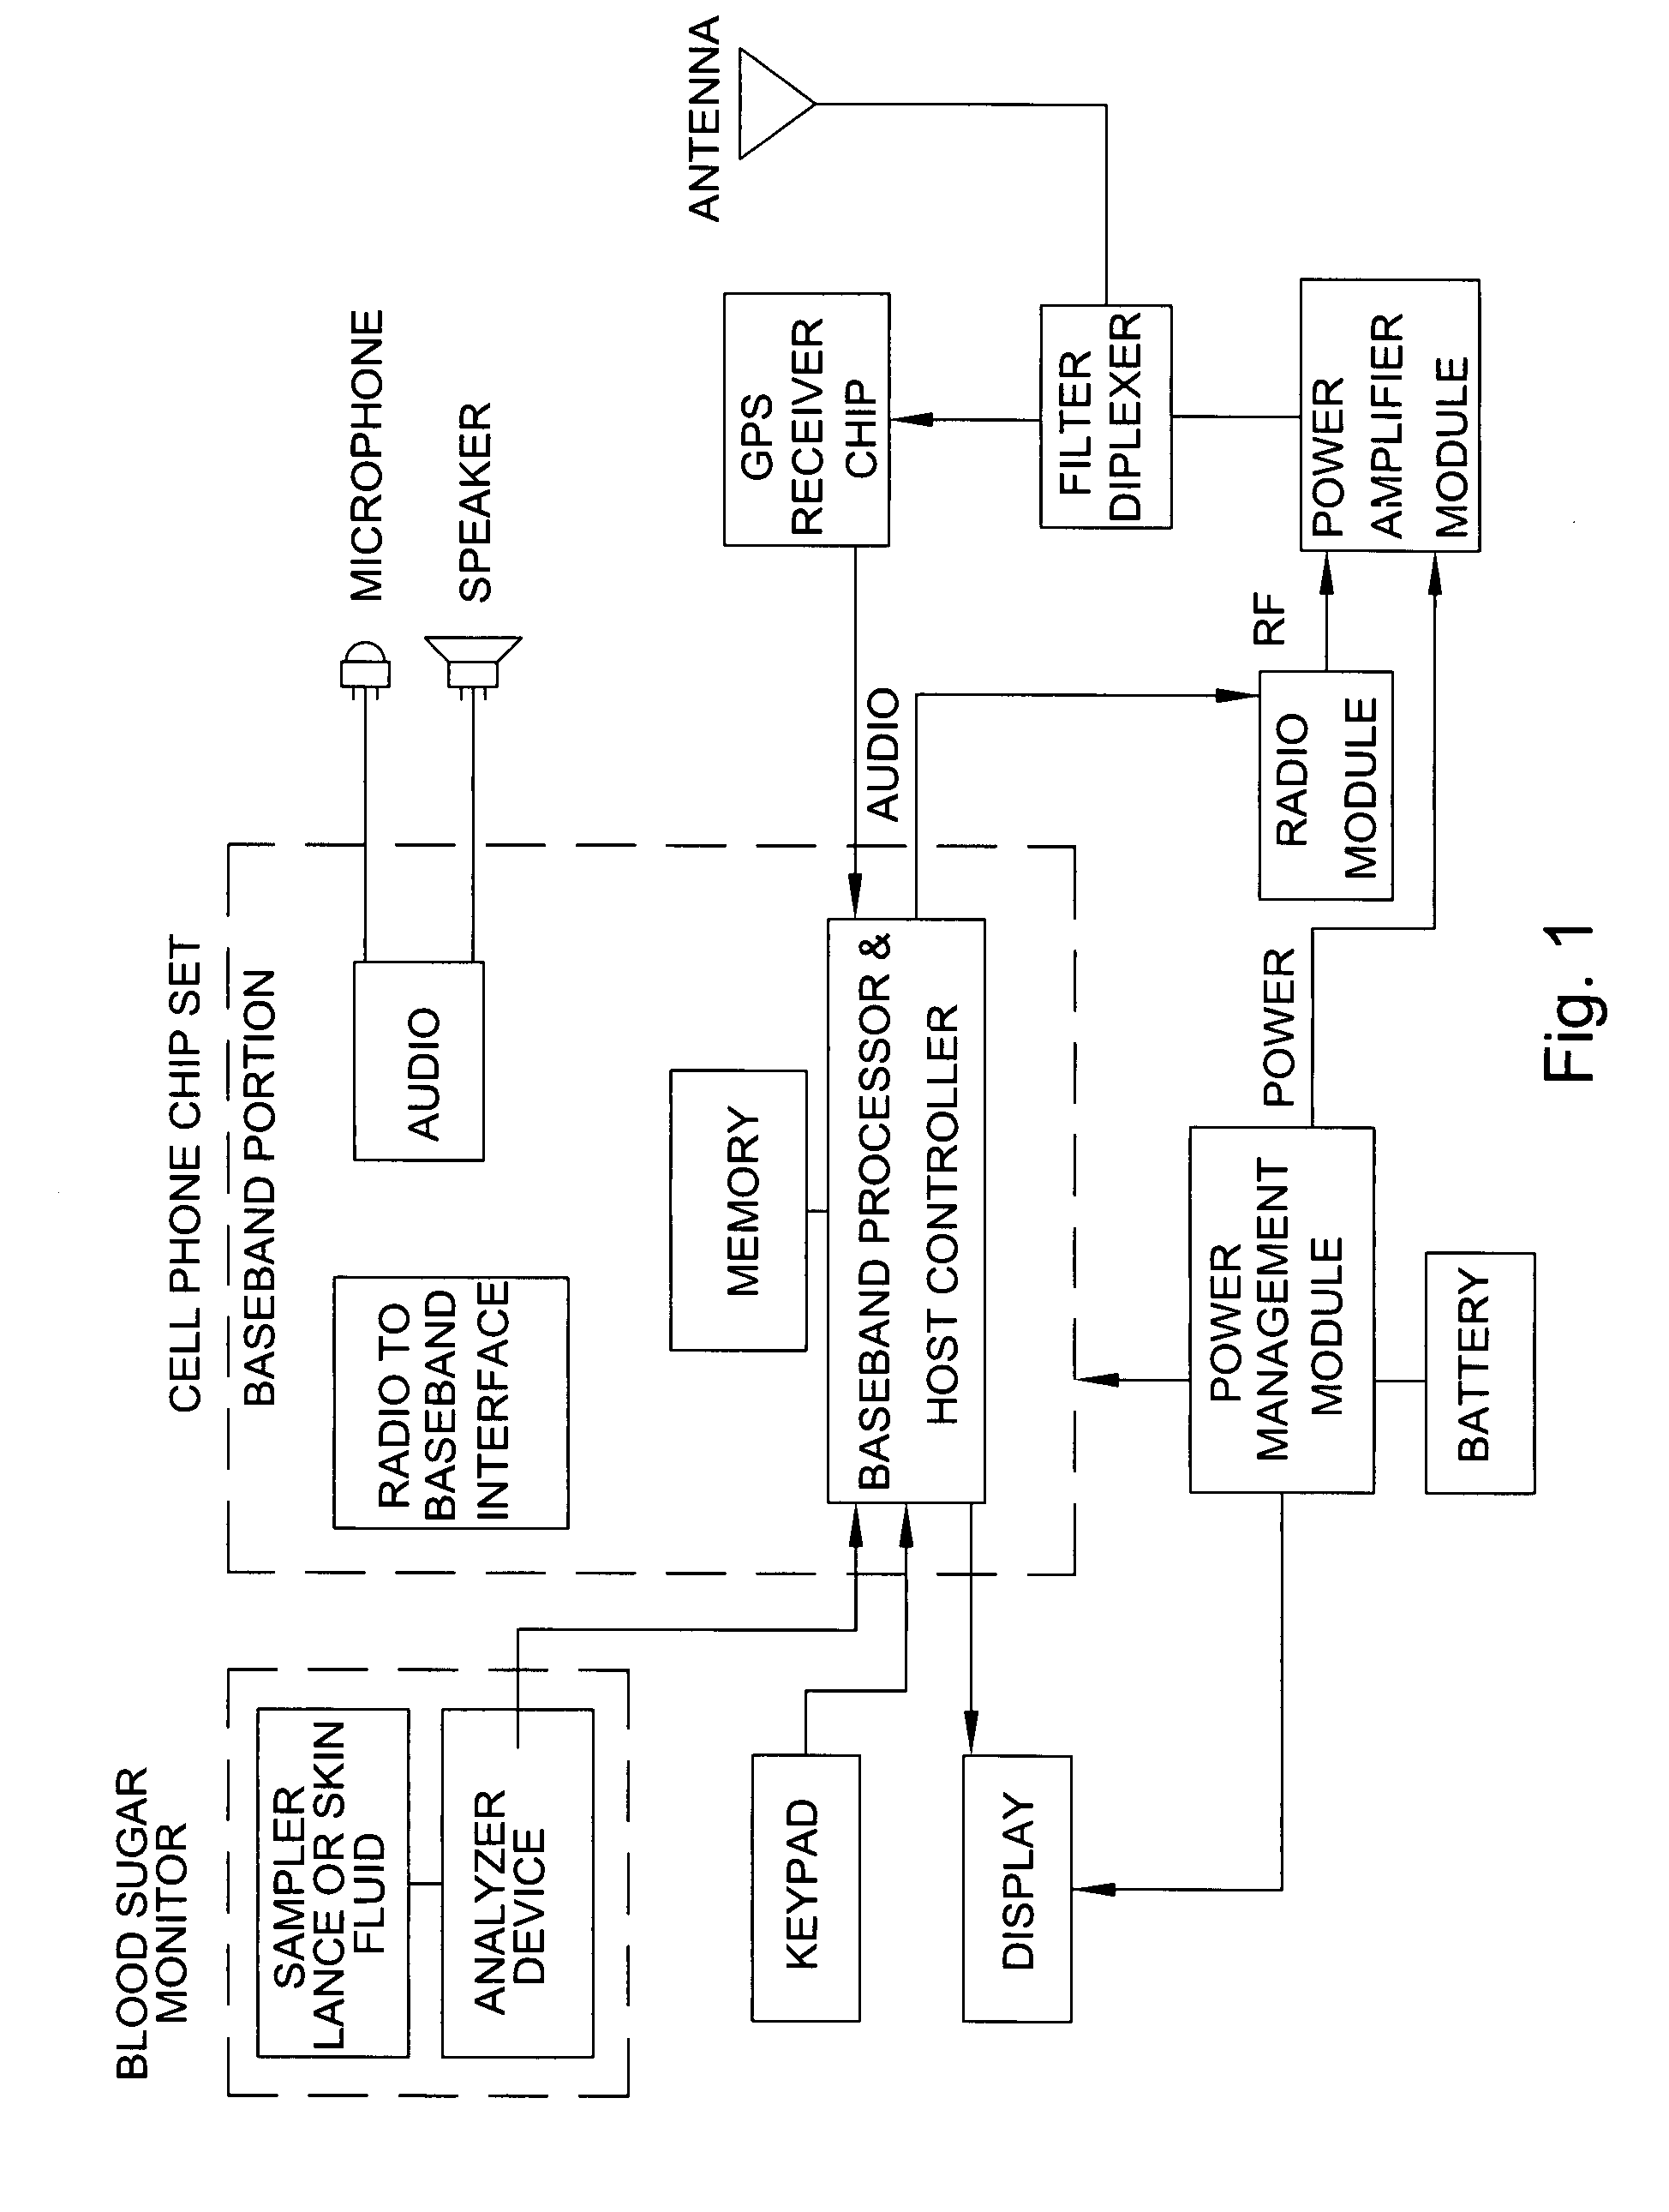 Combined cell phone and medical monitoring apparatus